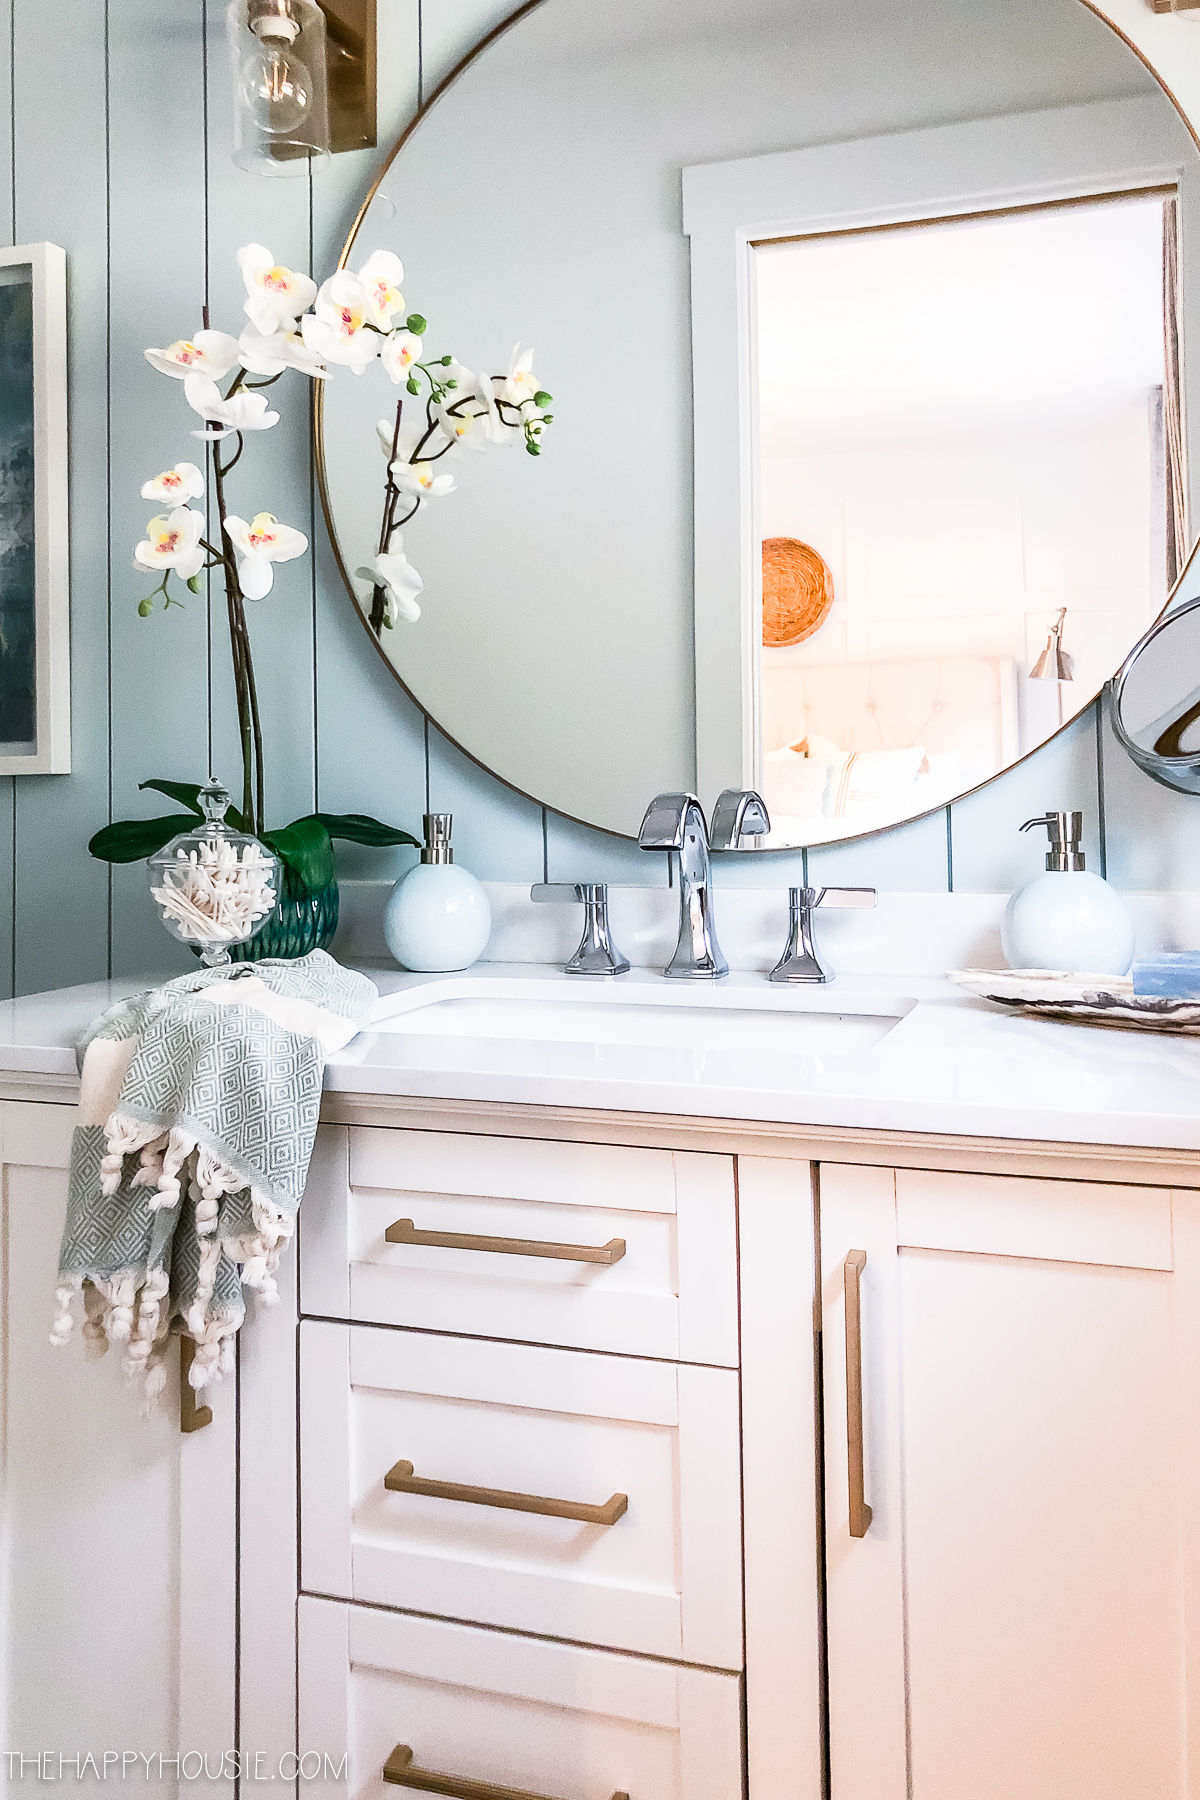 https://www.thehappyhousie.com/wp-content/uploads/2020/02/how-to-organize-your-bathroom-even-if-you-dont-have-much-storage-space-29.jpg